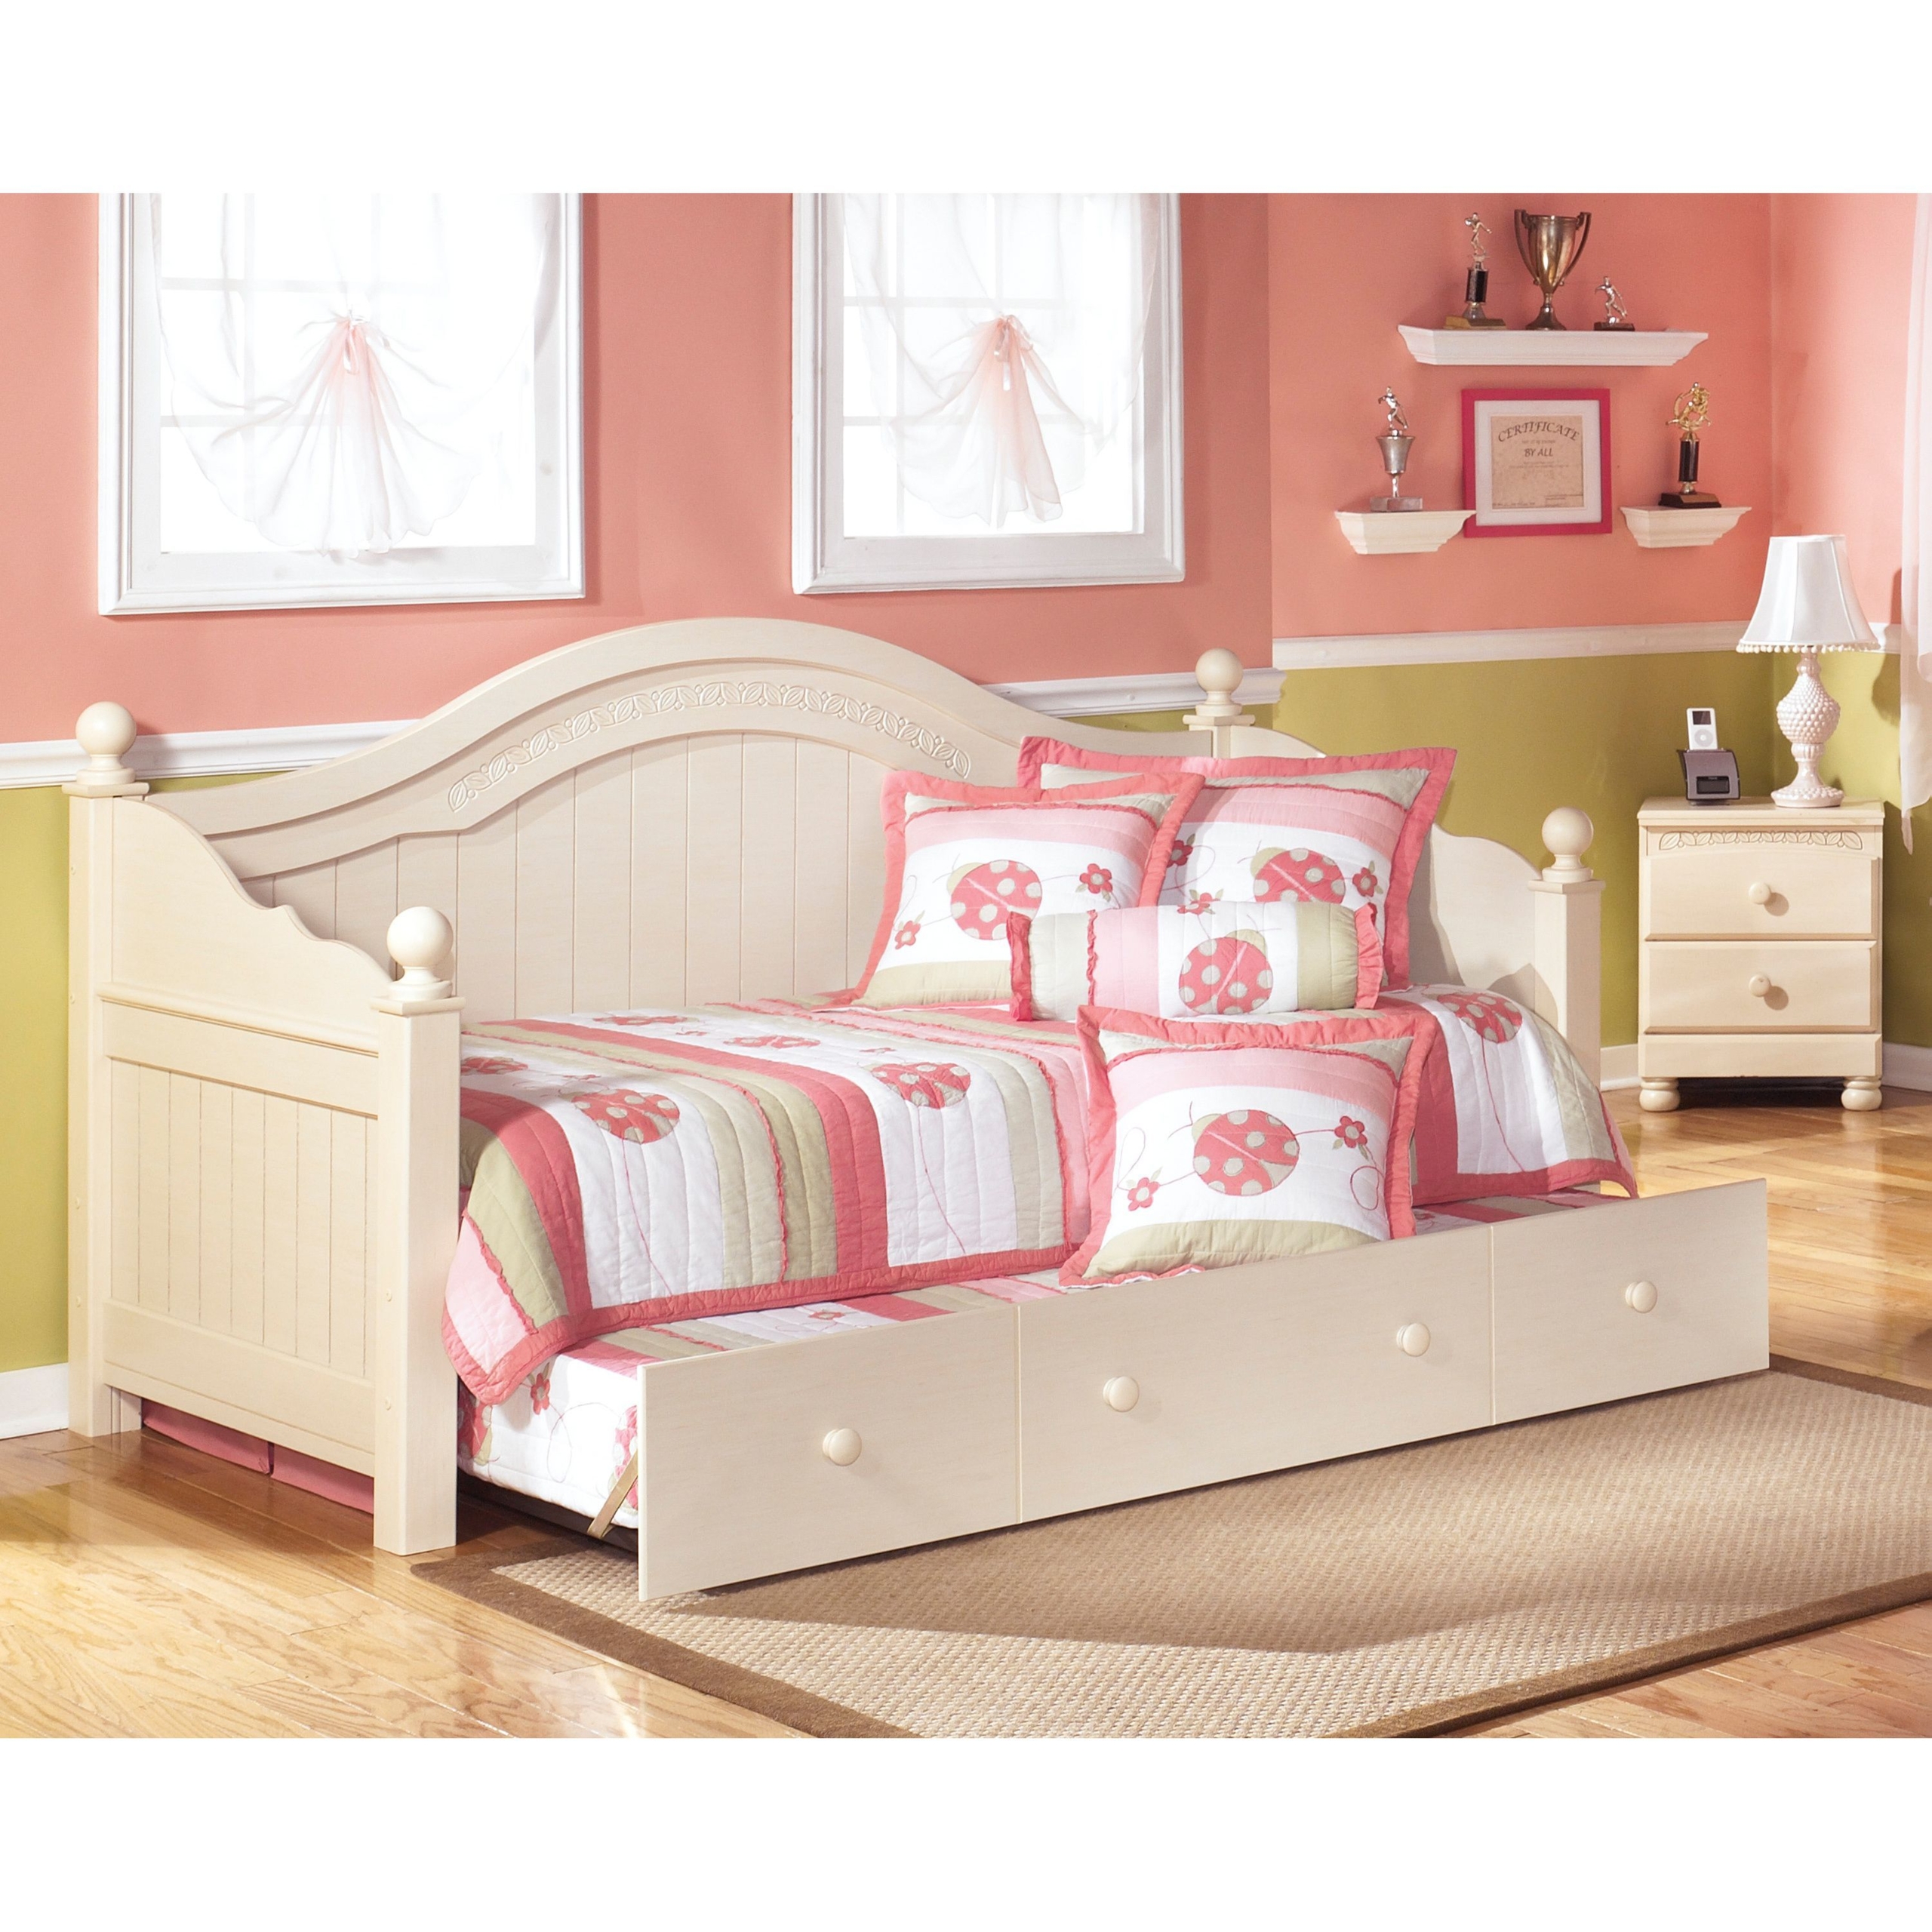 beds for young girls